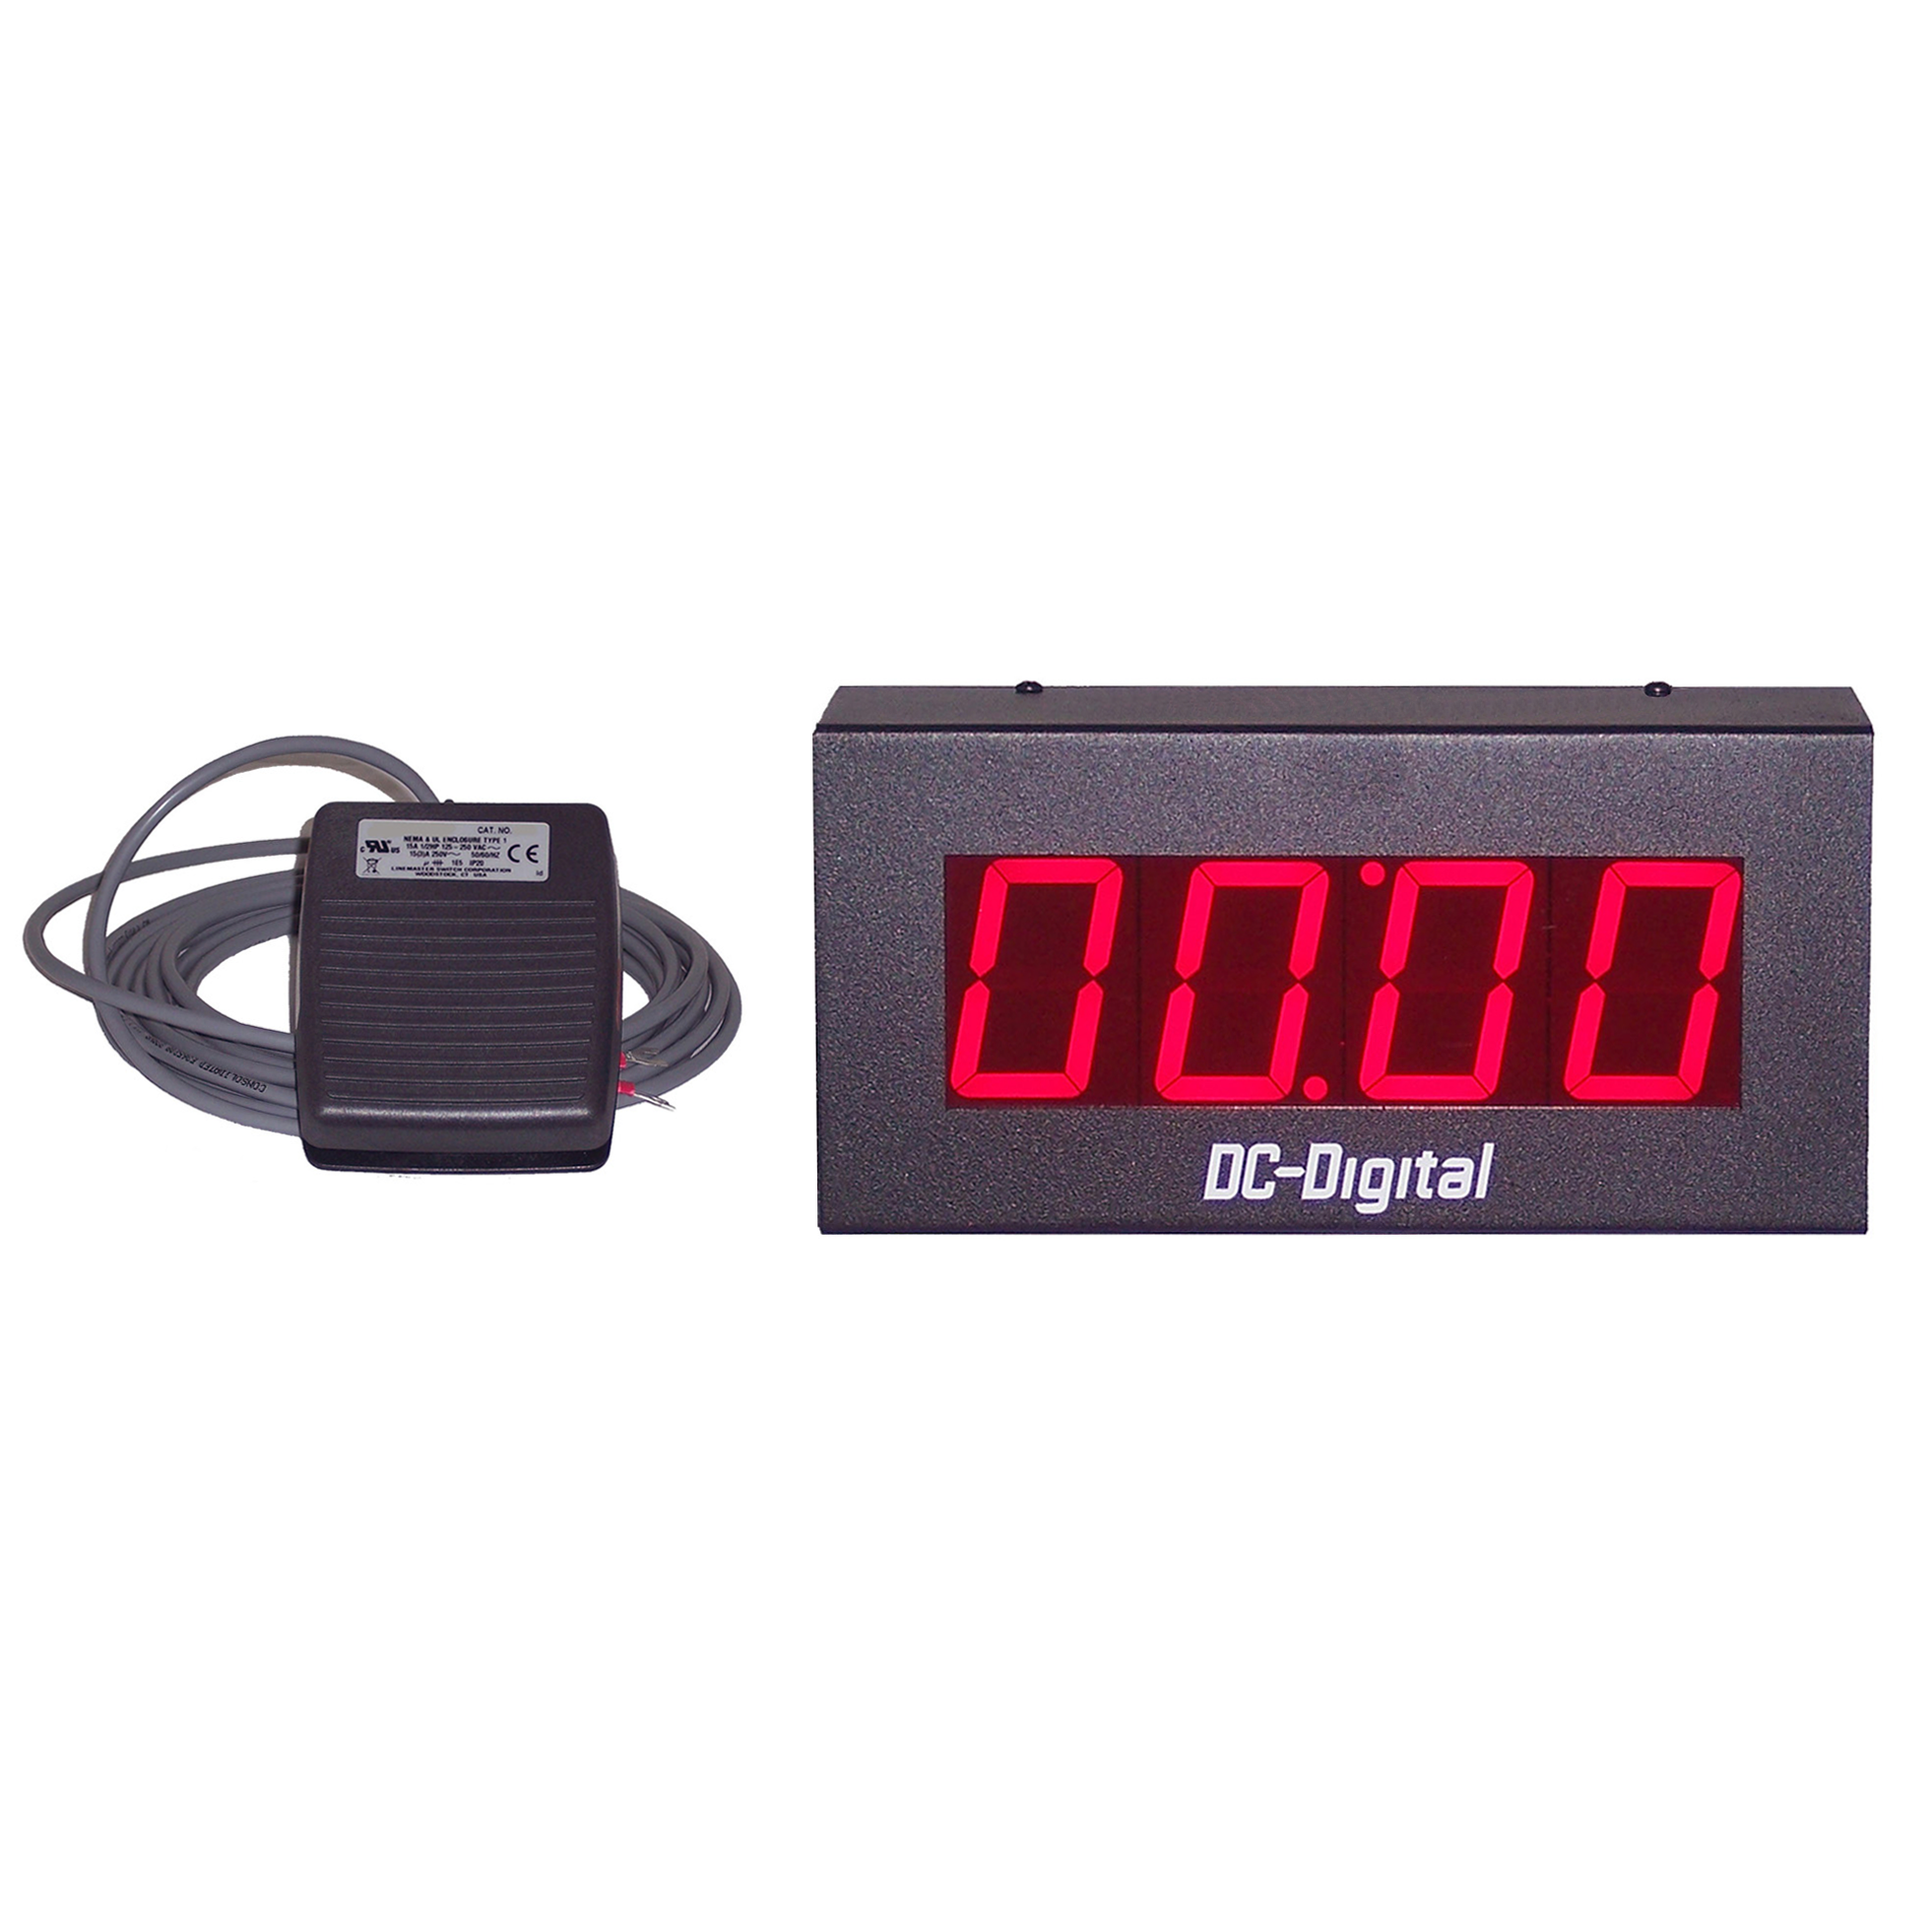 (DC-25T-UP-FOOT) 2.3 Inch LED, Foot-Switch Controlled, Digital Count UP Process Timer